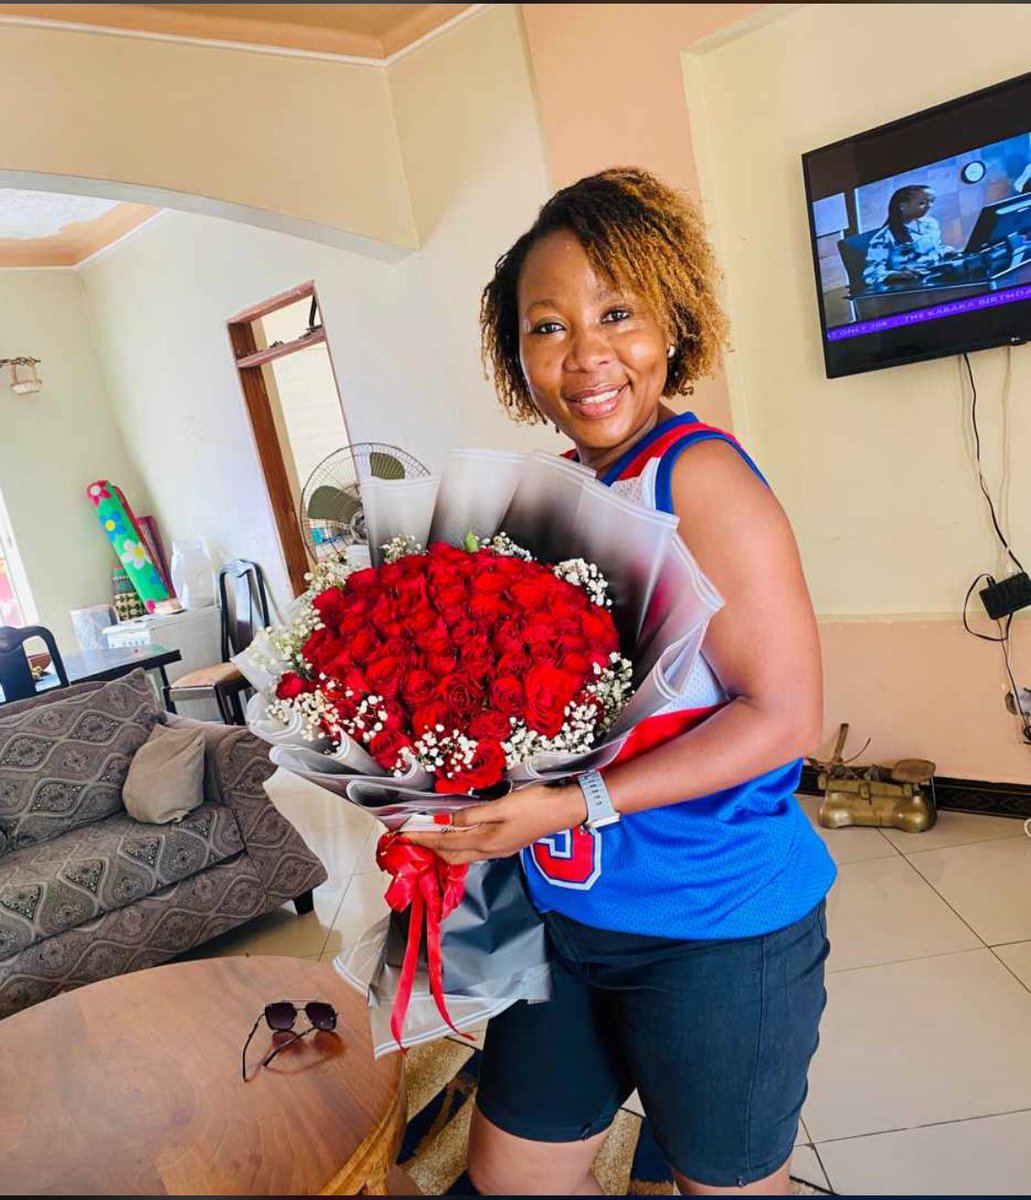 Reminder; She wants flowers without having to ask🥰🥰🥰